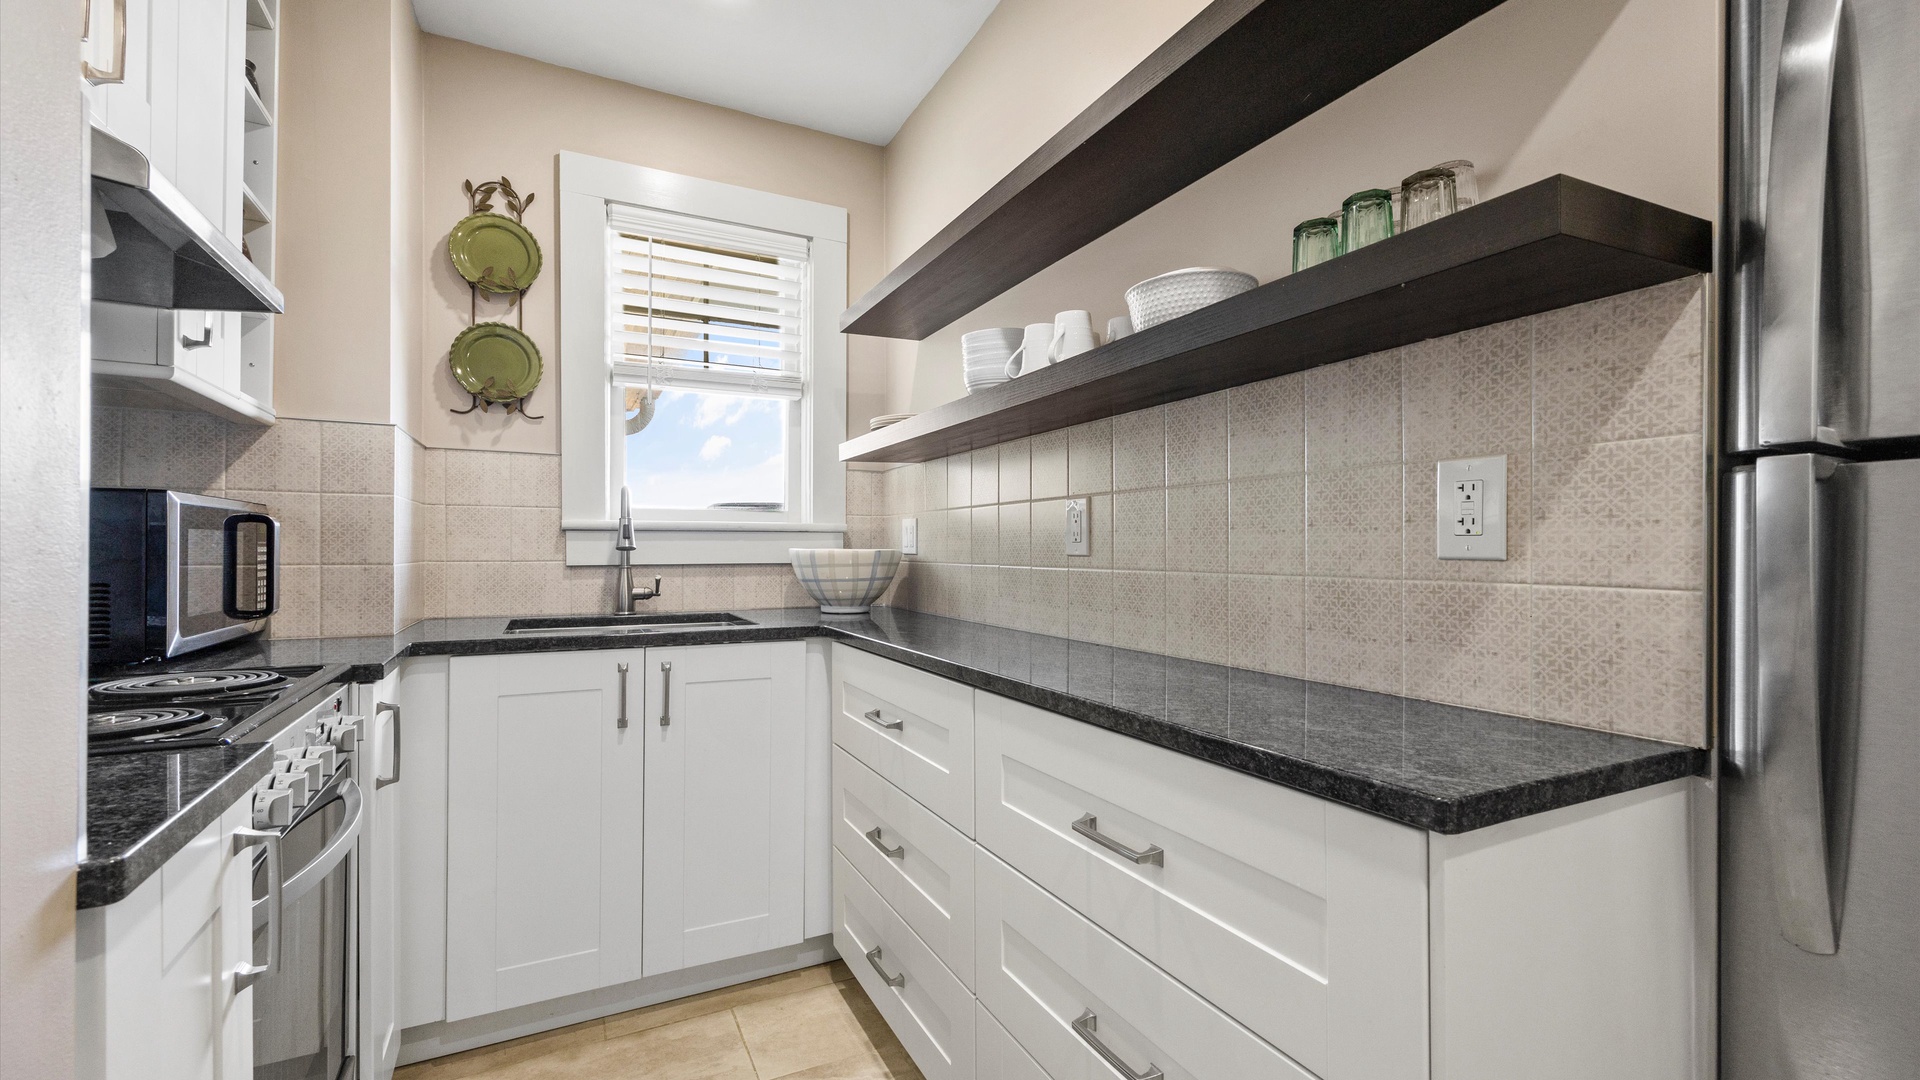 The cozy kitchen offers ample storage space & all the comforts of home